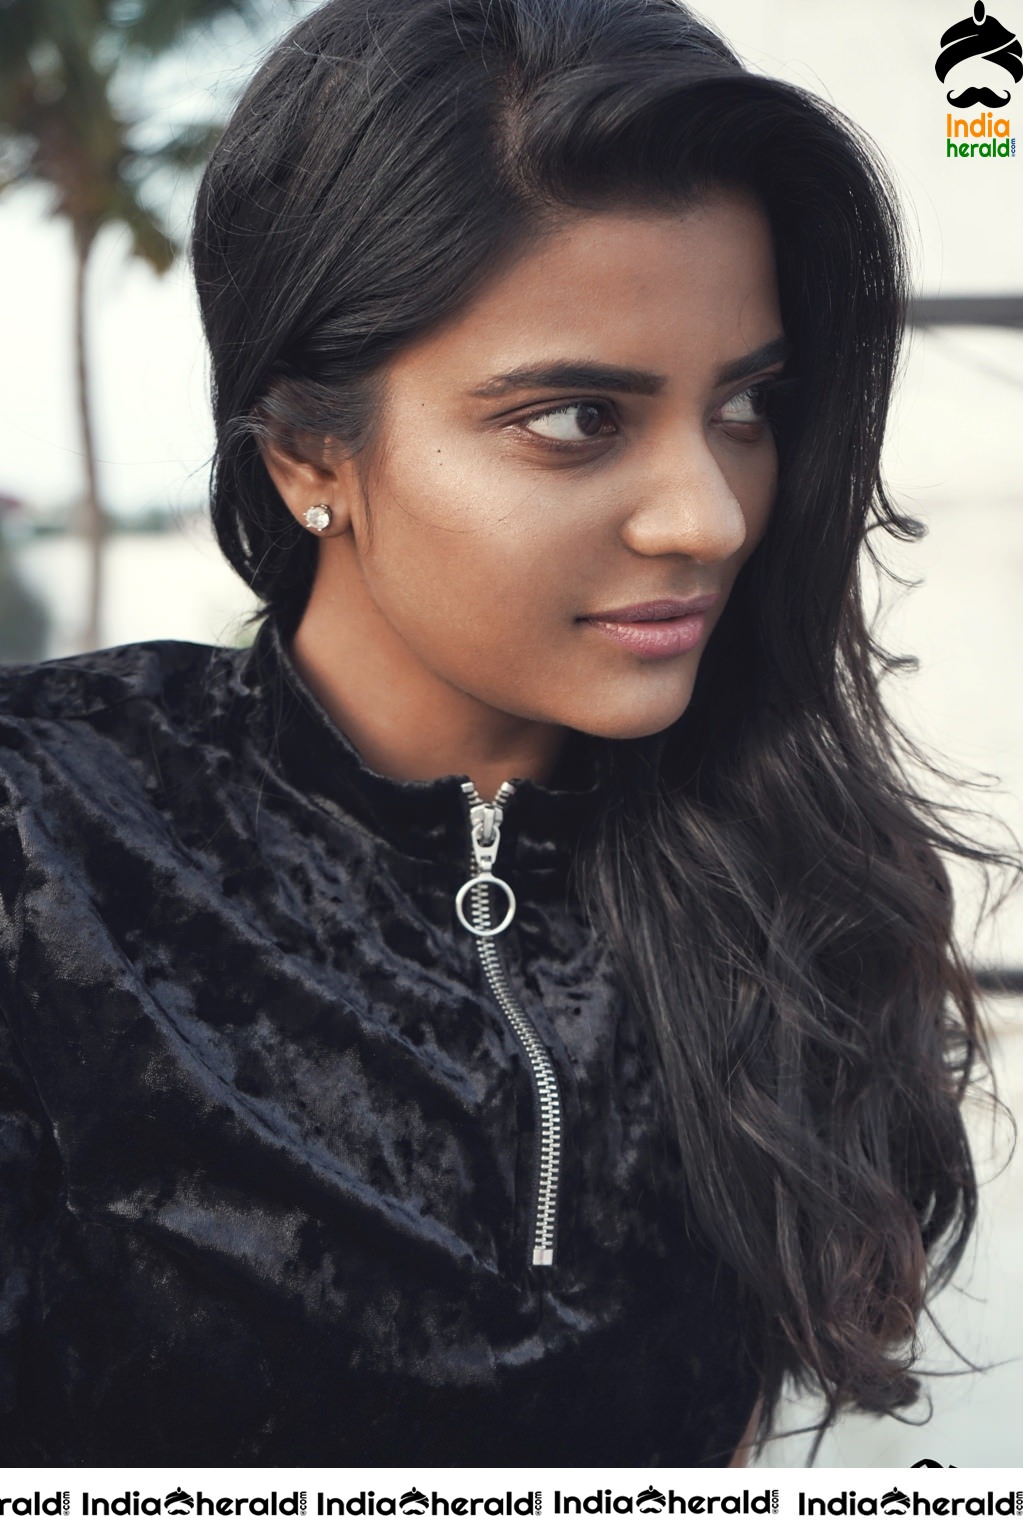 Aishwarya Rajesh Looking Snazzy From Her Latest Photoshoot